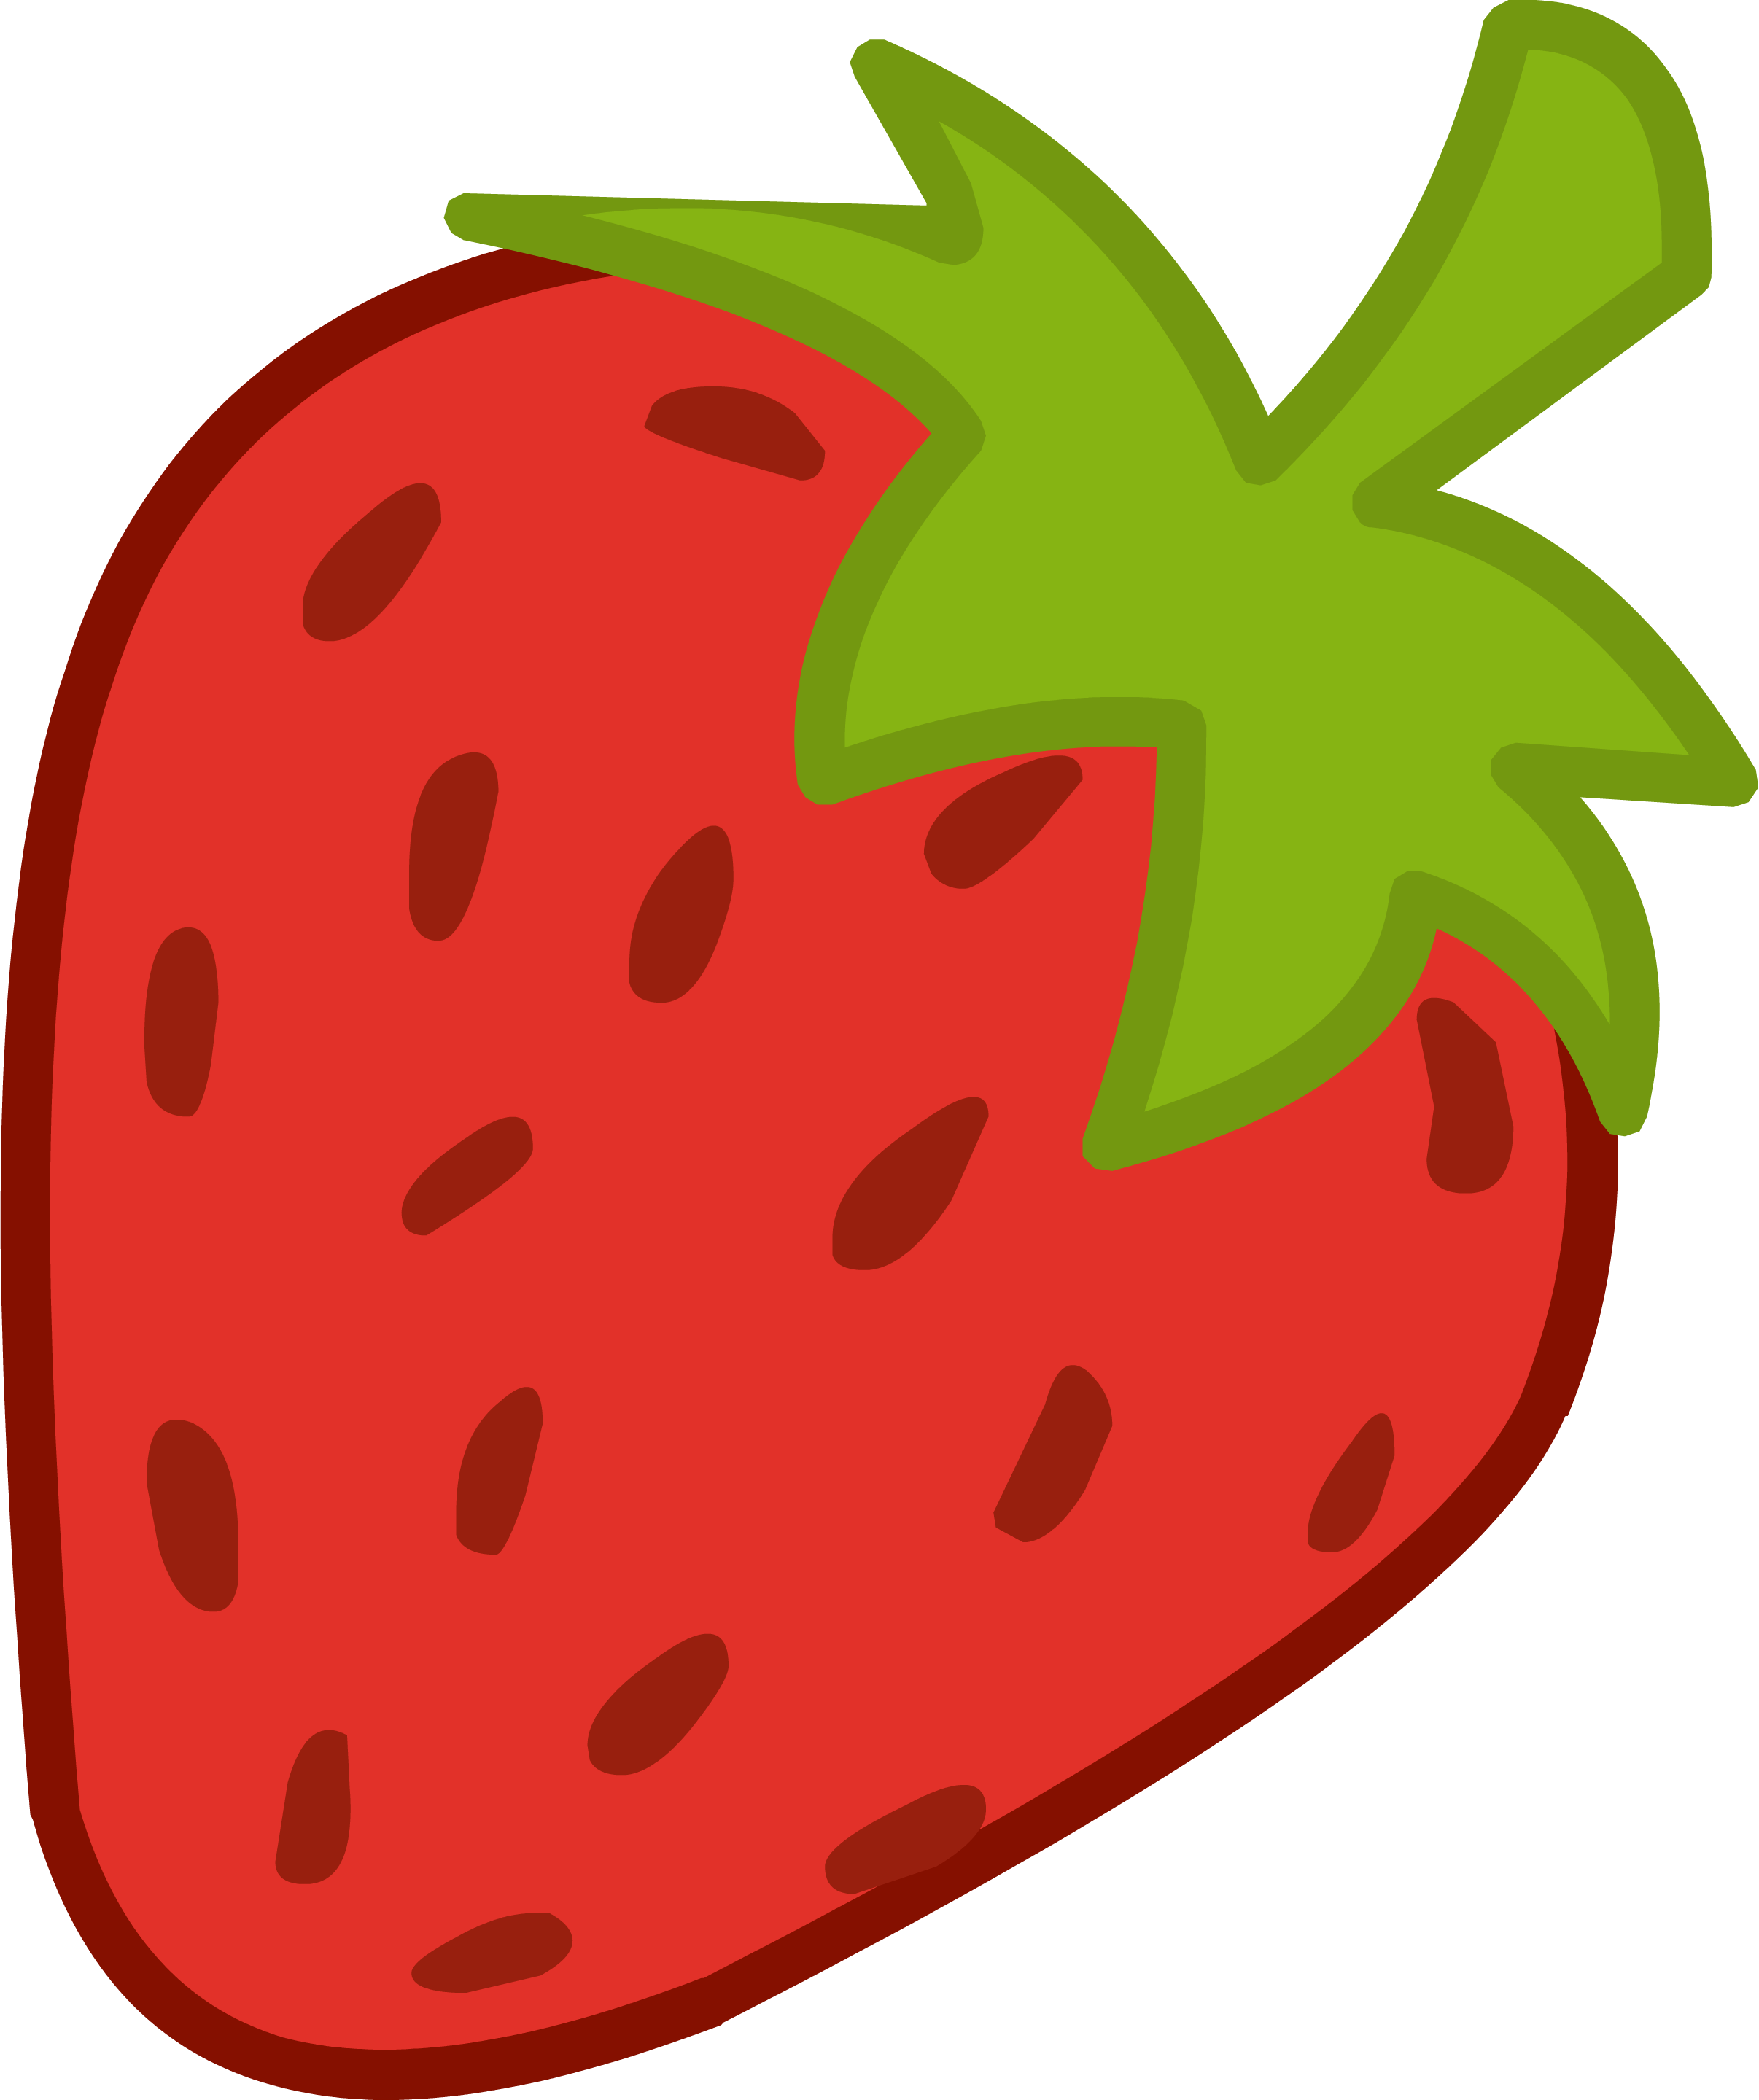 Free Strawberry Png Image Clipart